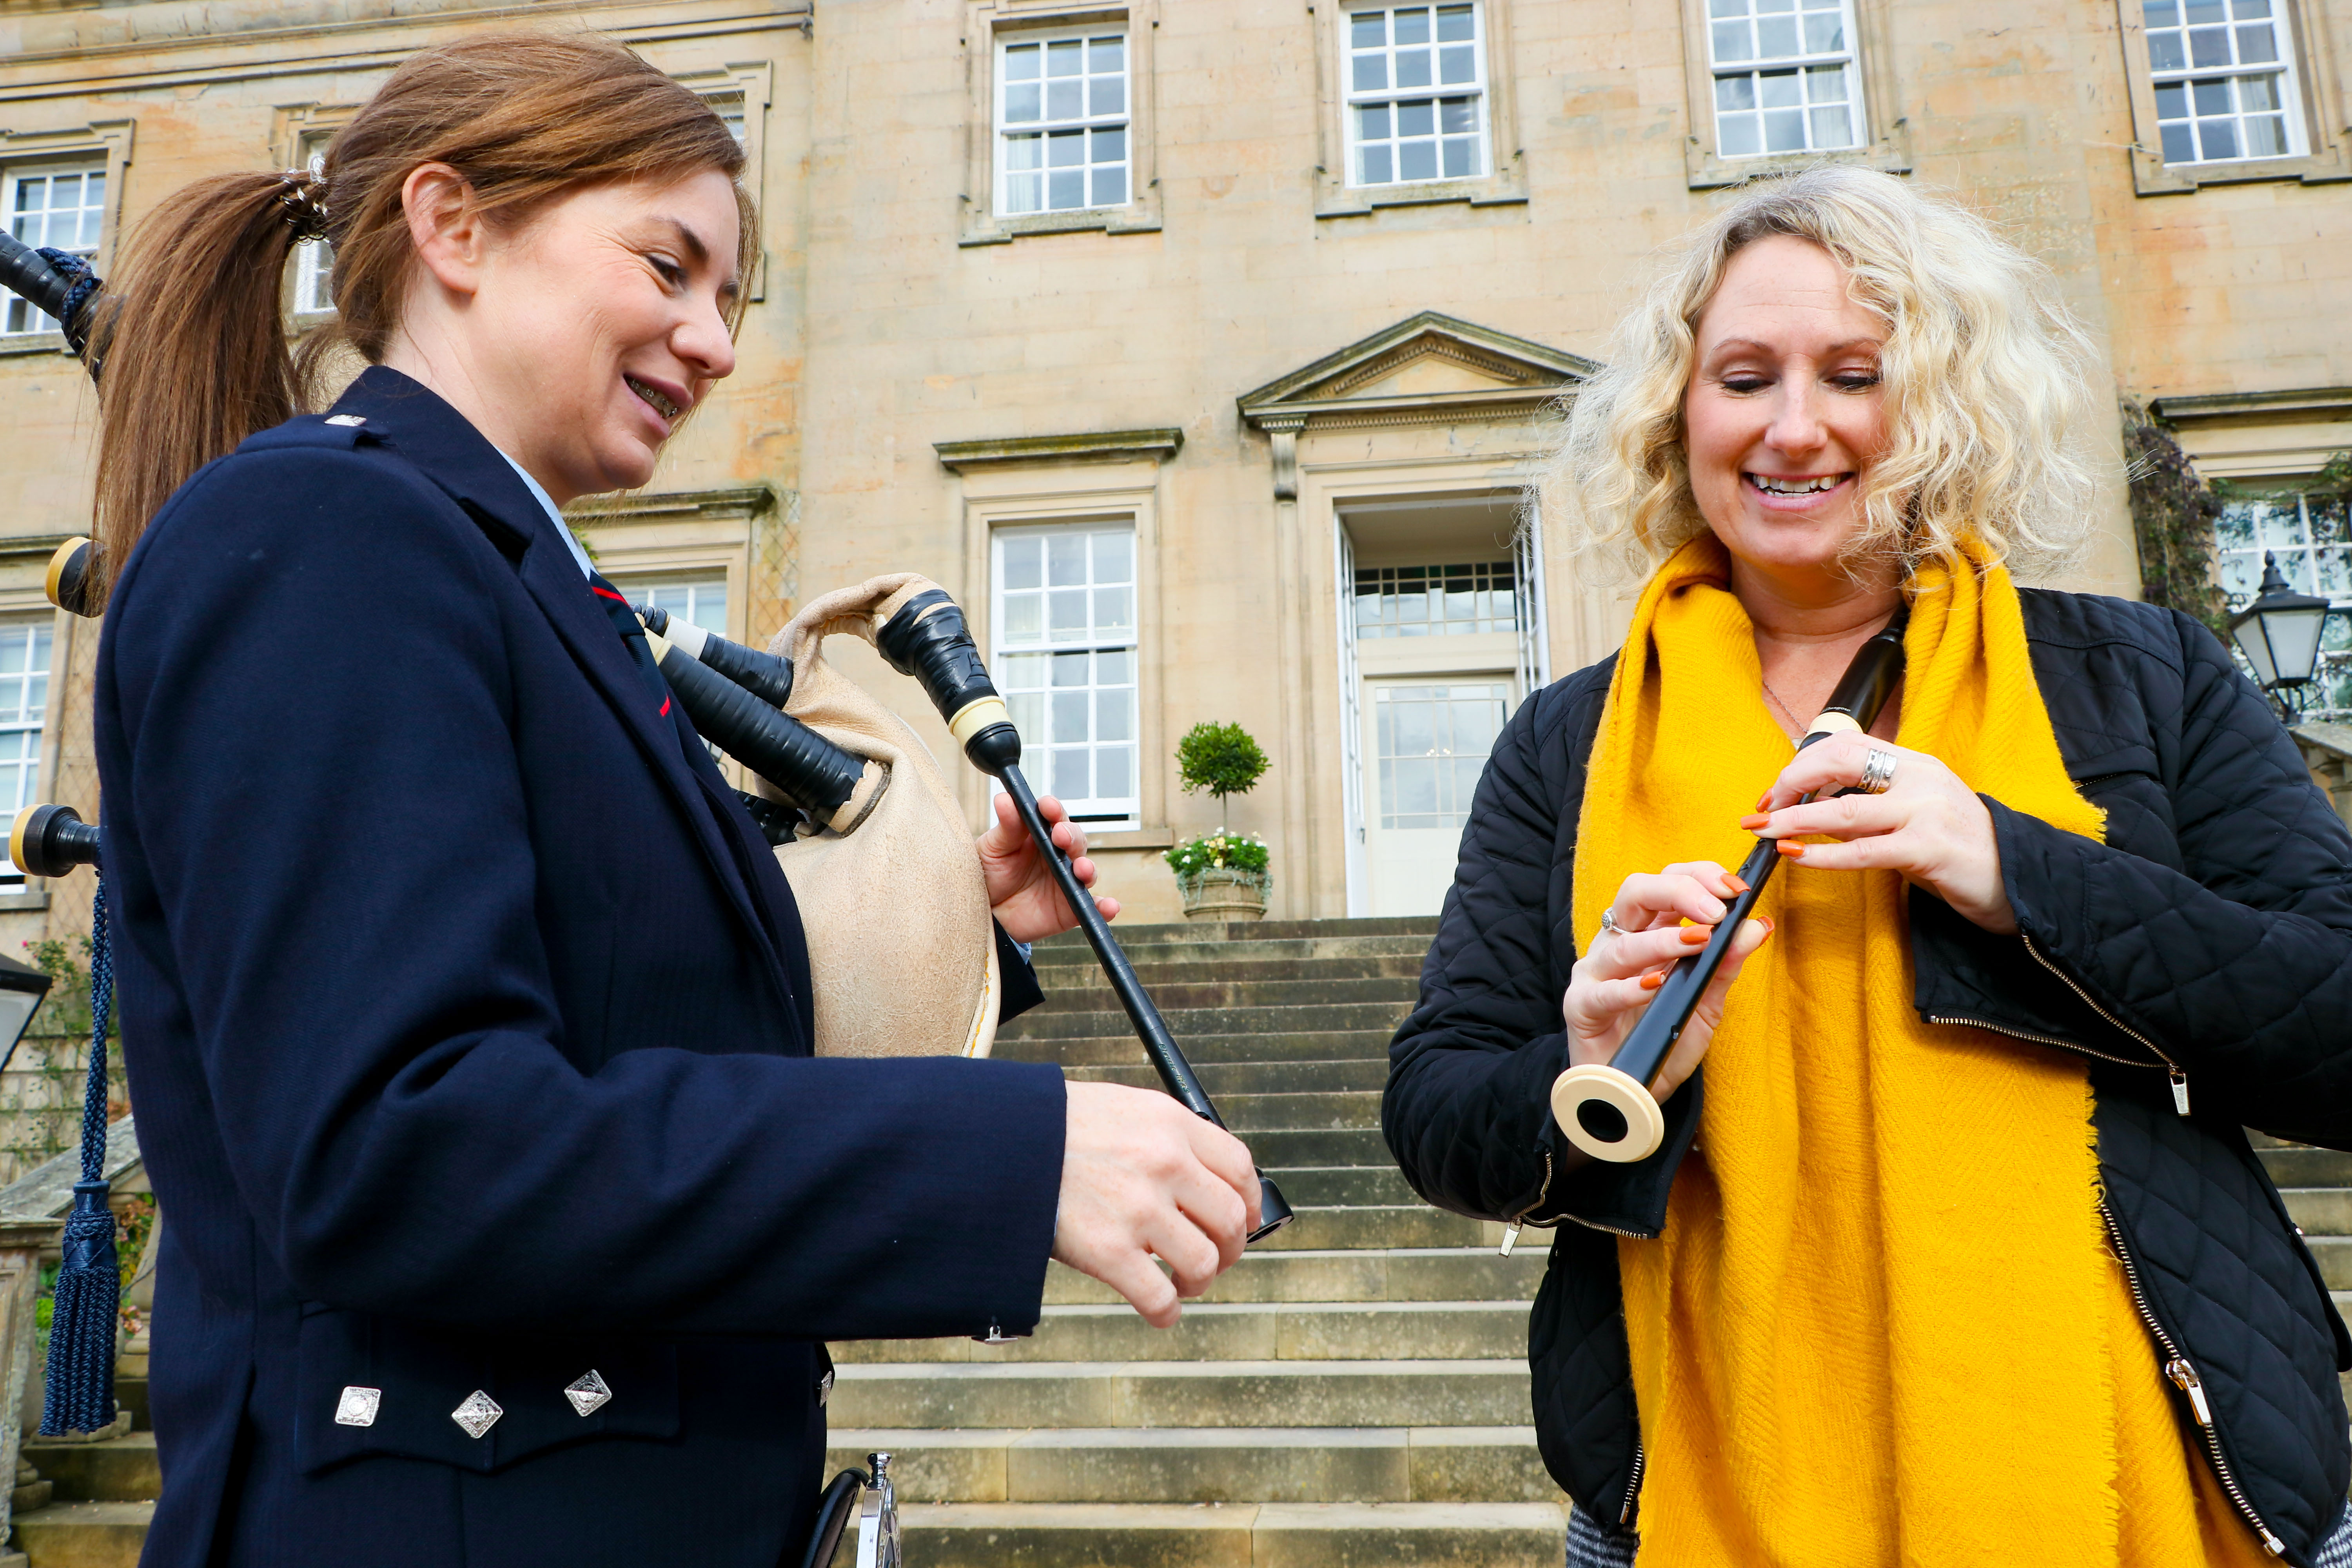 Piping For Health will offer participants an introduction to playing the chanter and bagpipes, breathing techniques, chair yoga, hand reflexology among other therapies 